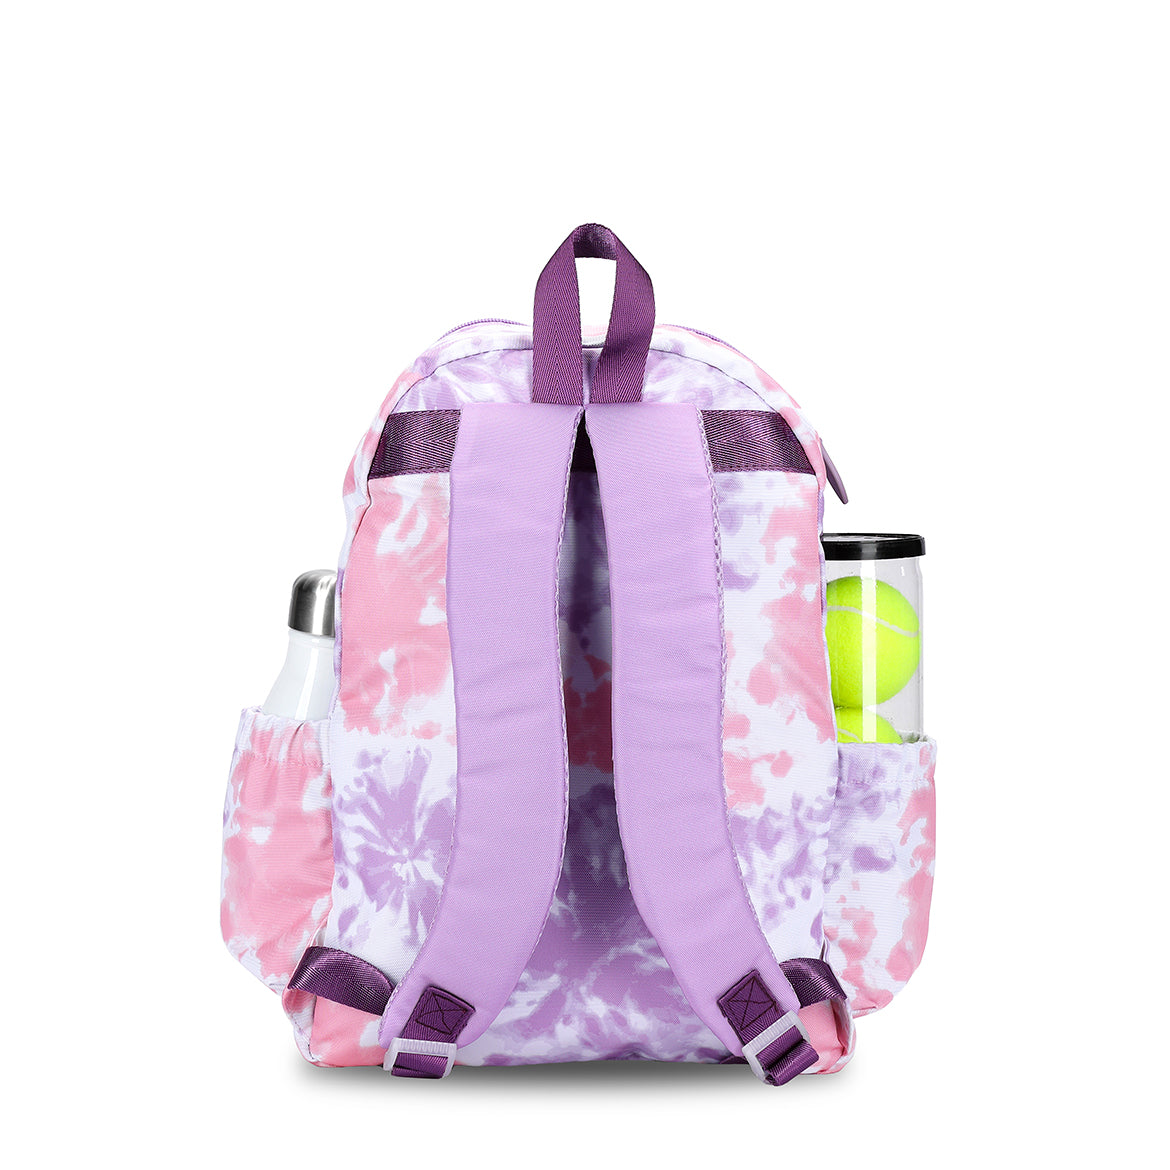 Back view of a pink and purple tie dye kids tennis backpack. There is a racquet pocket in the front for holding a tennis racquet.